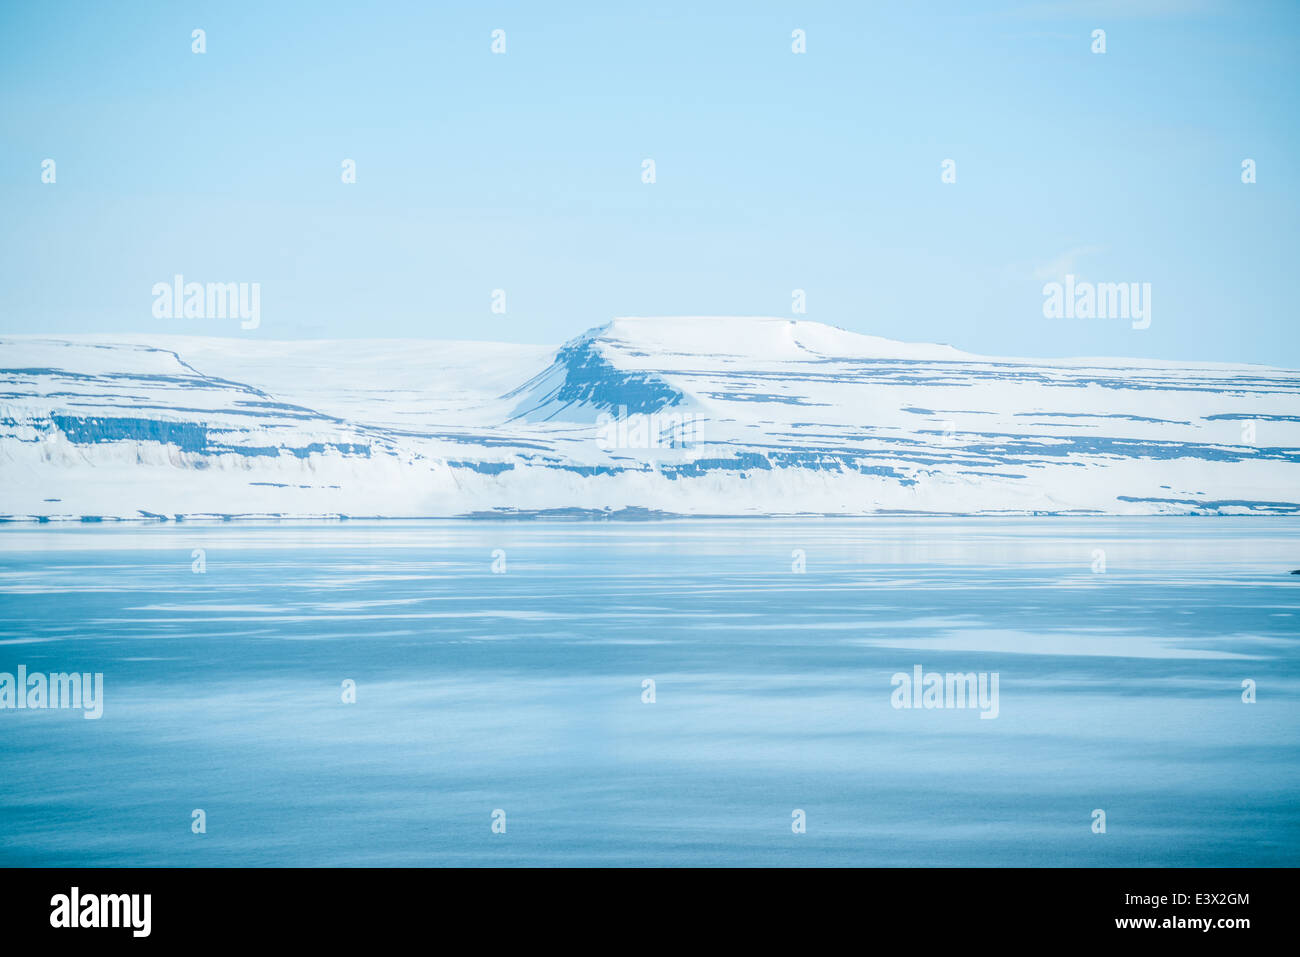 Iceland winter landscape of beautiful mountains covered in snow and ice Stock Photo